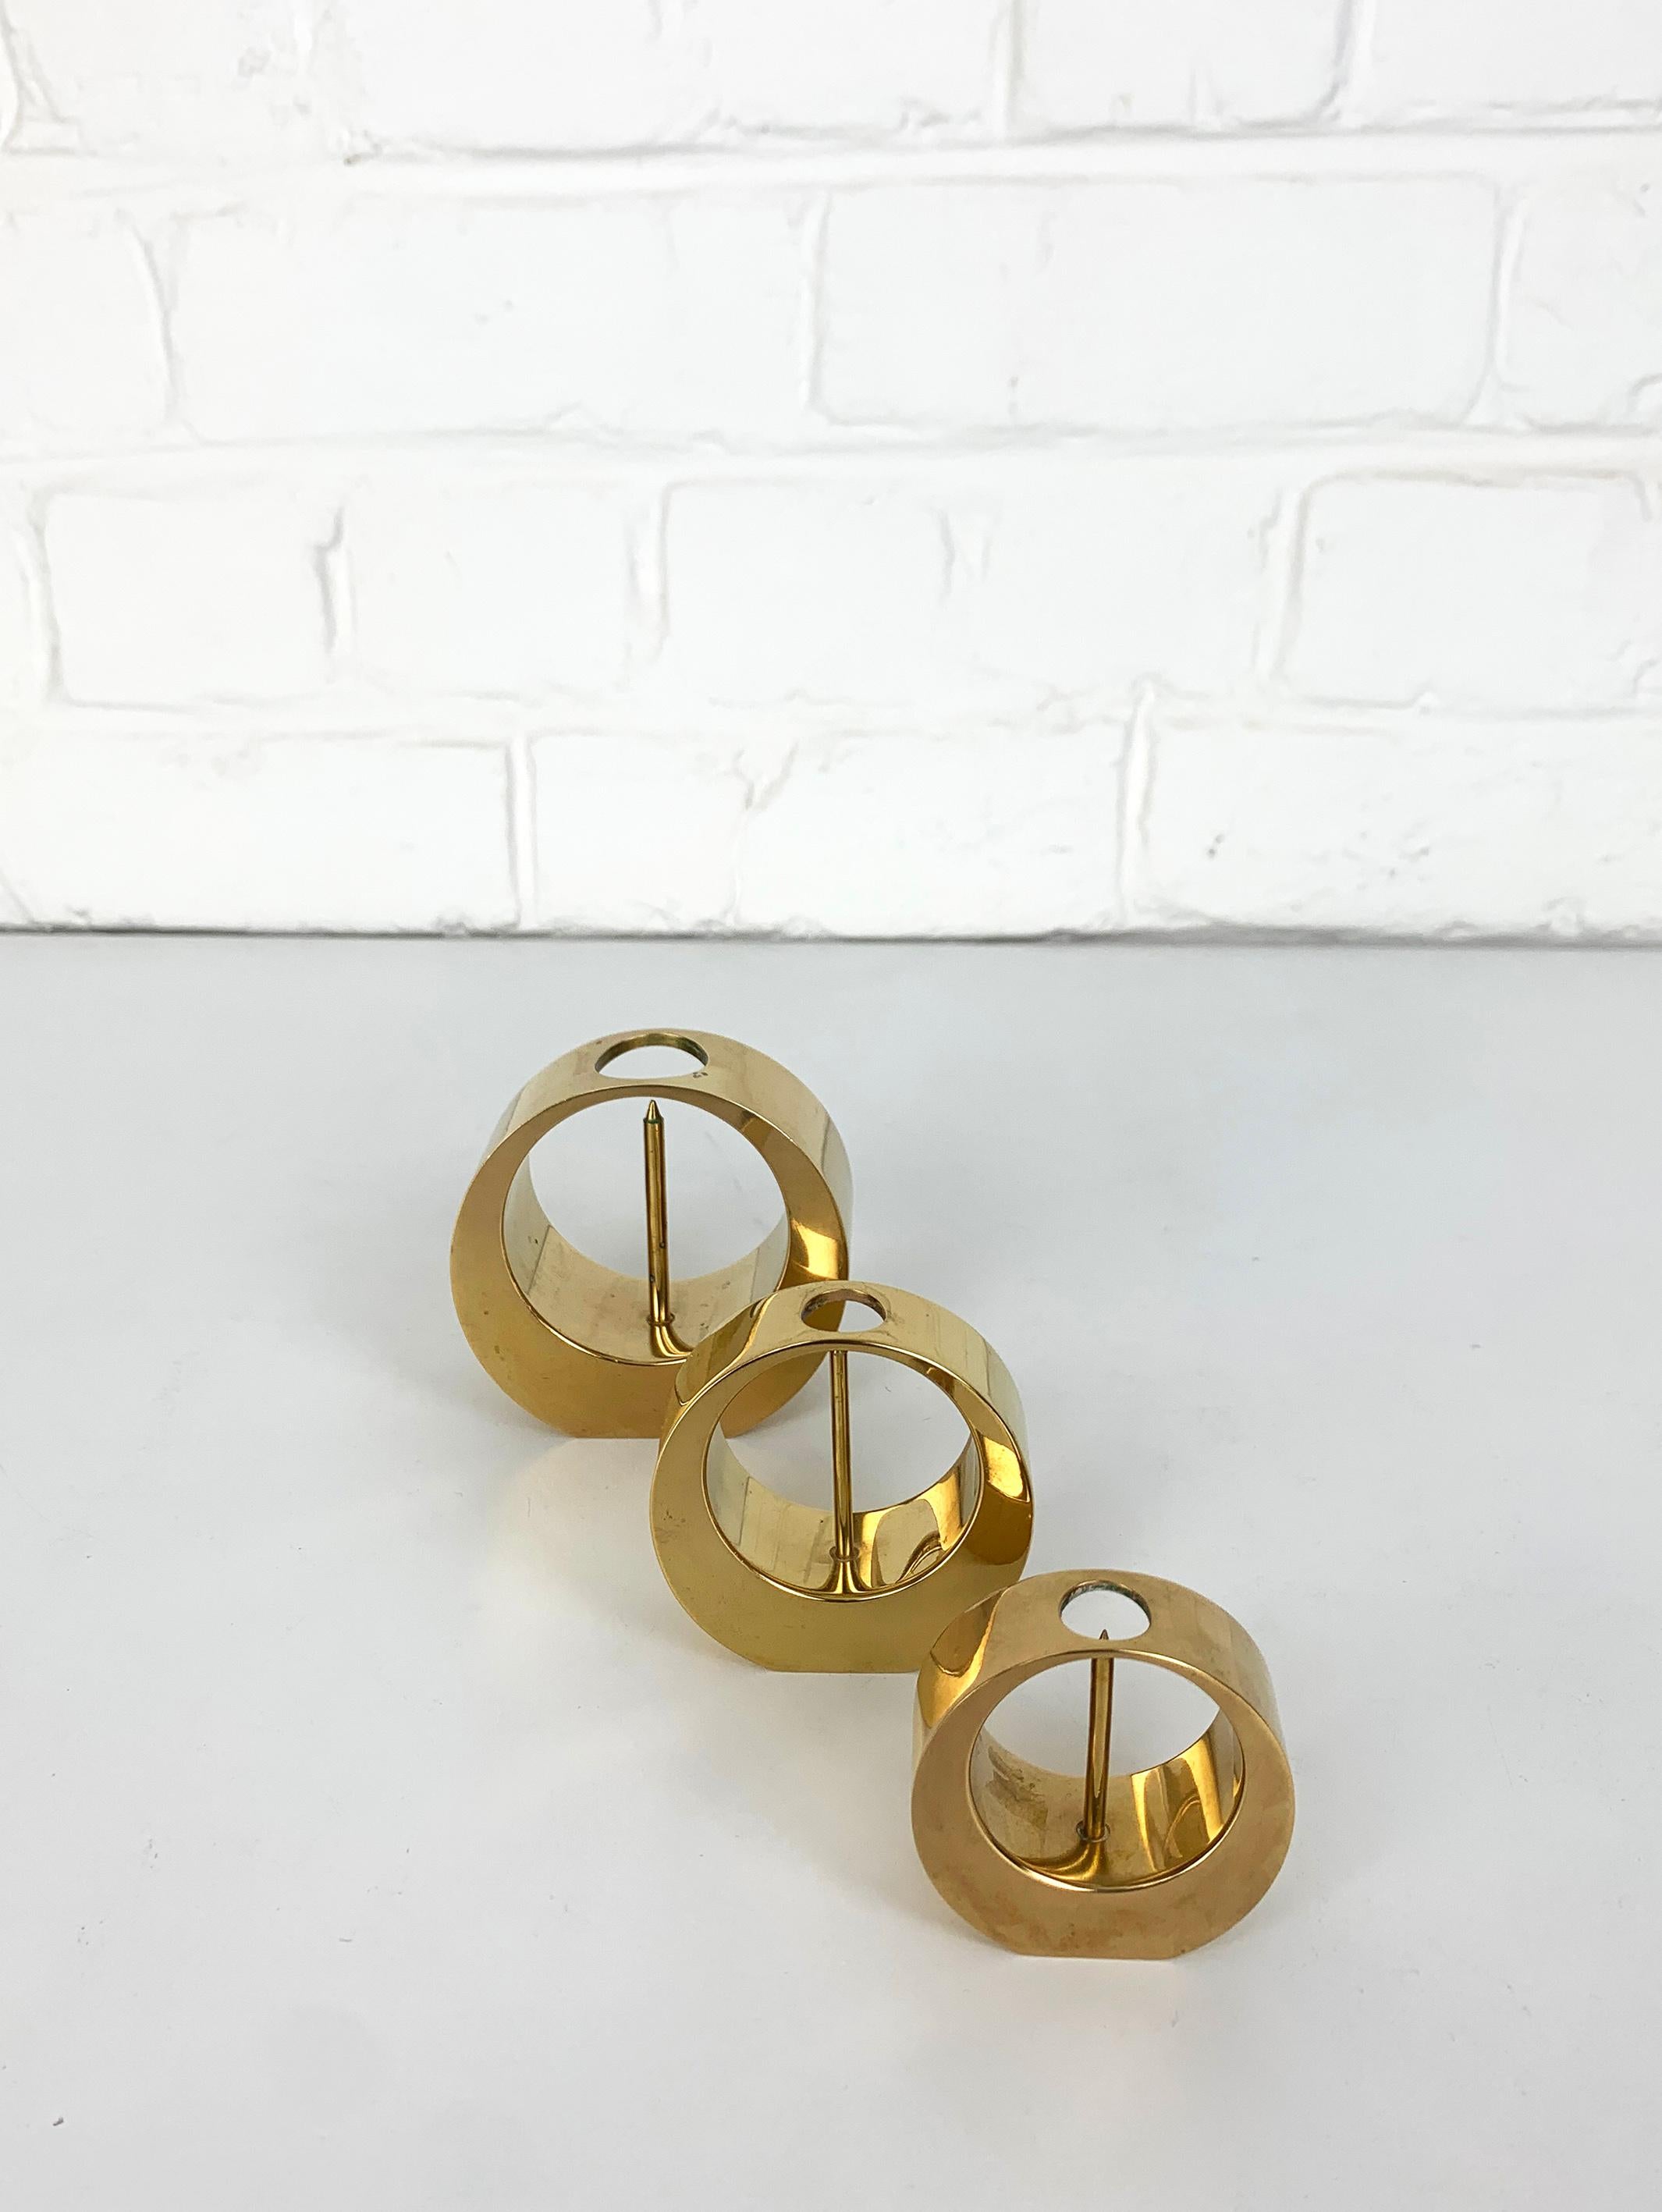 Set of 3 Mid-Century Candlesticks in Brass by Arthur Pe, Kolbäck, Sweden In Good Condition For Sale In Vorst, BE